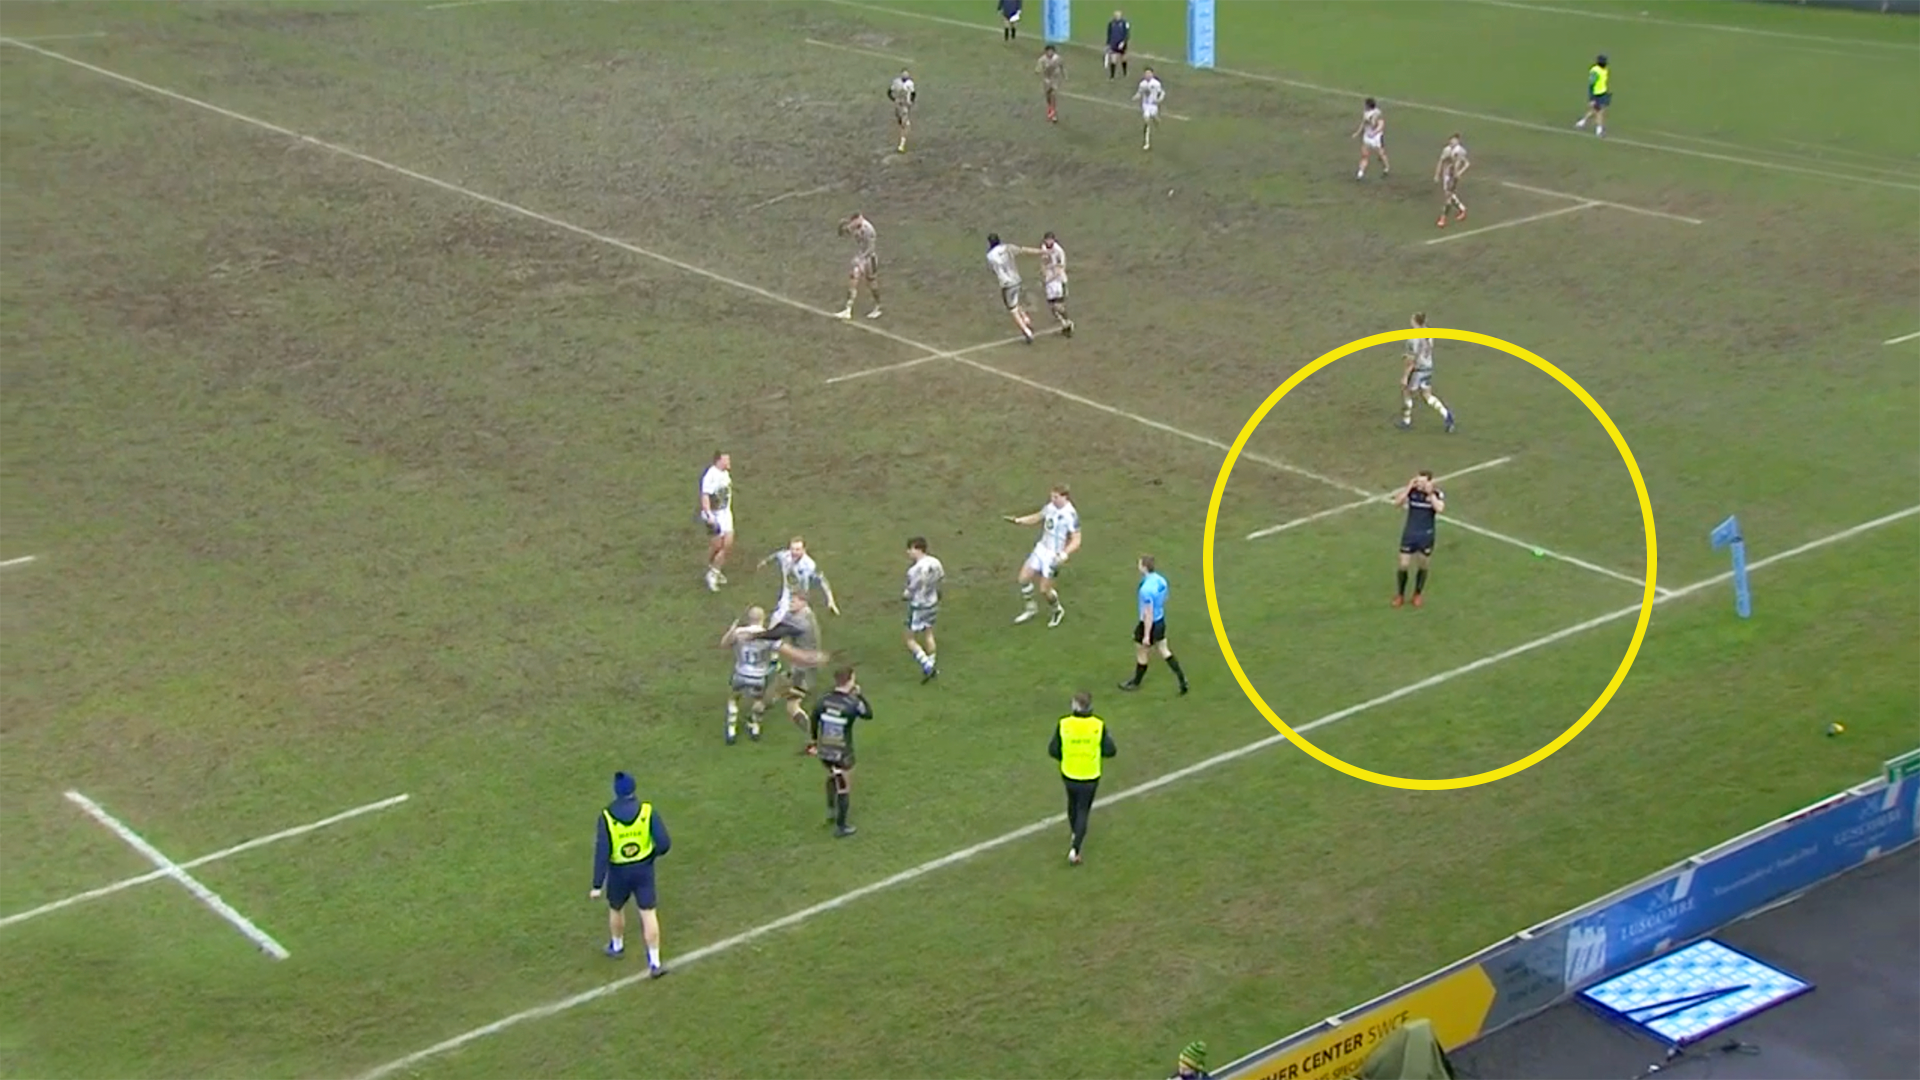 'He's moved! He's moved!' - Exeter Chiefs stunned after controversial finish against Saints